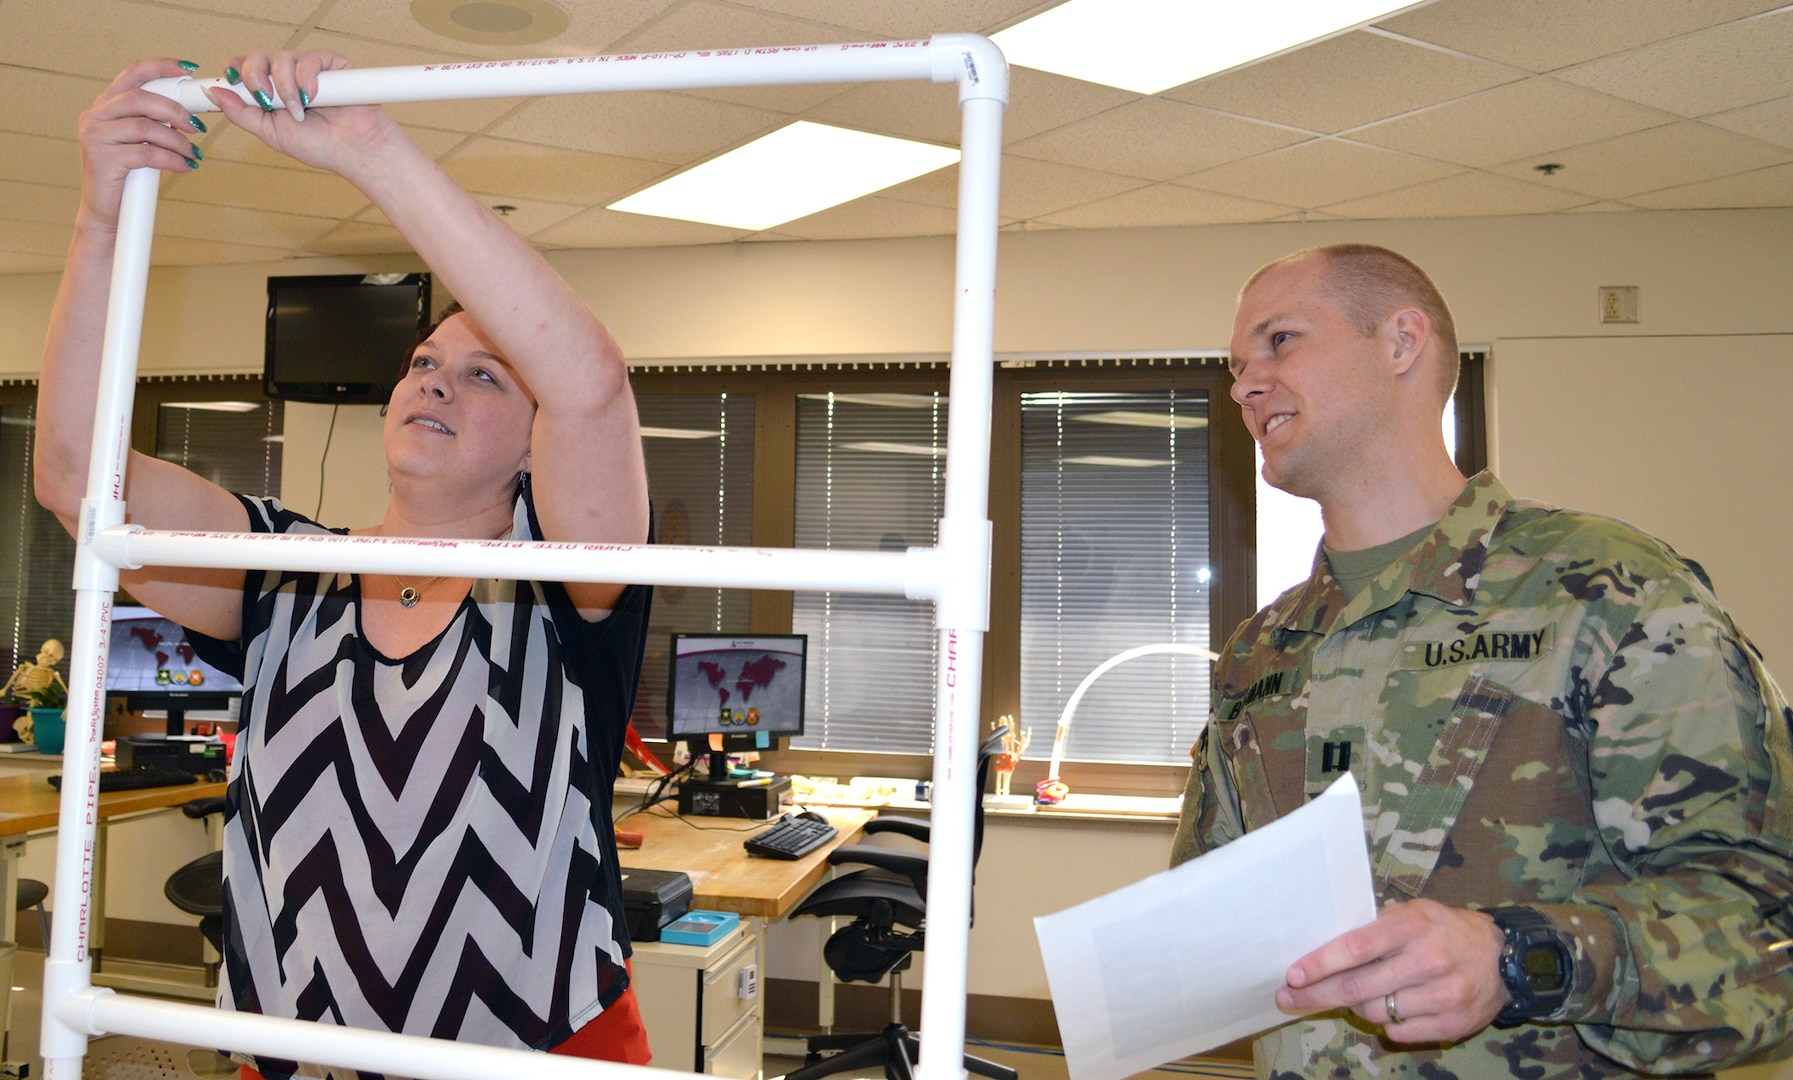 Army Capt. Matthew Baumann (right), registered occupational therapist, watches as Allissa Surran puts plastic piping together in the BAMC Outpatient Occupational Therapy Clinic March 27. Hand function encompasses a host of different areas such as: strength, sensation, endurance, range of motion, dexterity, visual acuity, cognition, etc. Activities such as this allow professionals to note one’s dominant and nondominant hand performance, and determine how an individual’s hand function is affected.